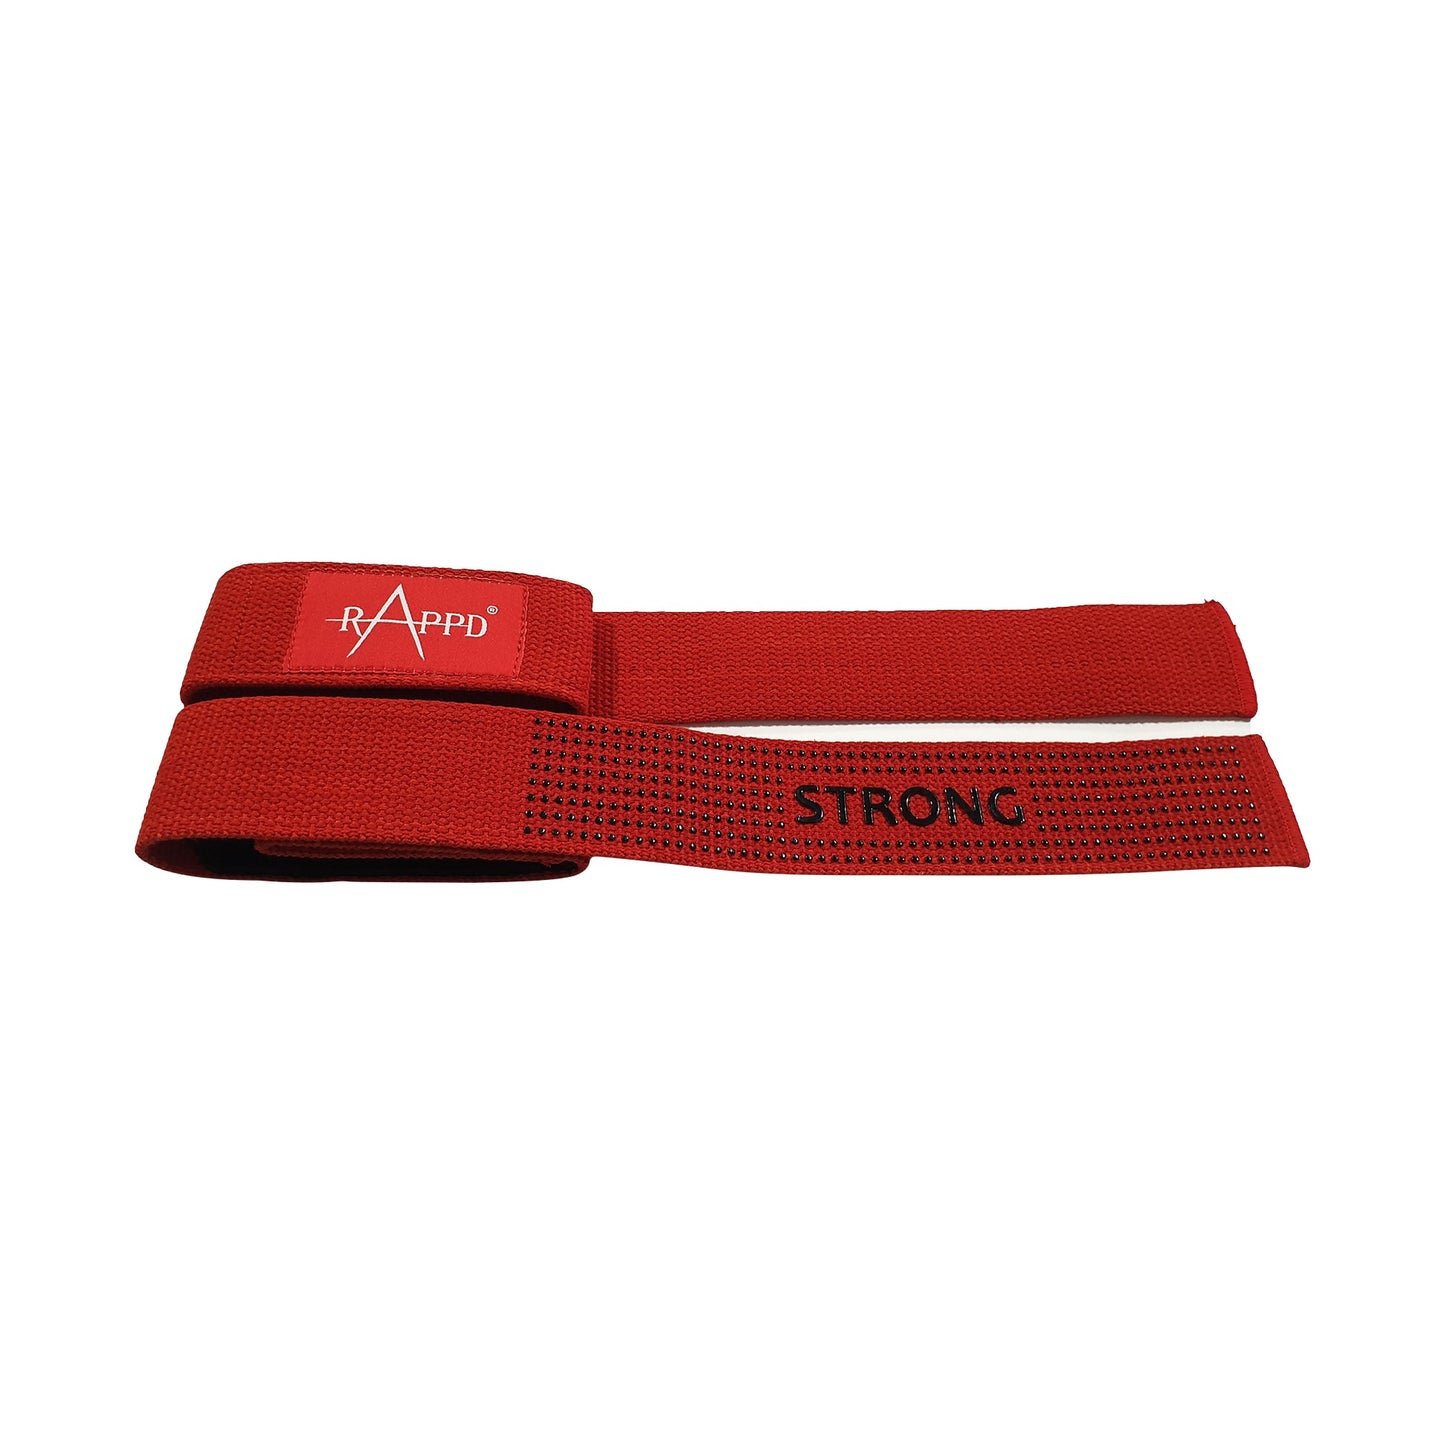 Rappd STRONG Single Loop Lifting Straps, Reduce Forearm Fatigue & Maximise Your Lifts